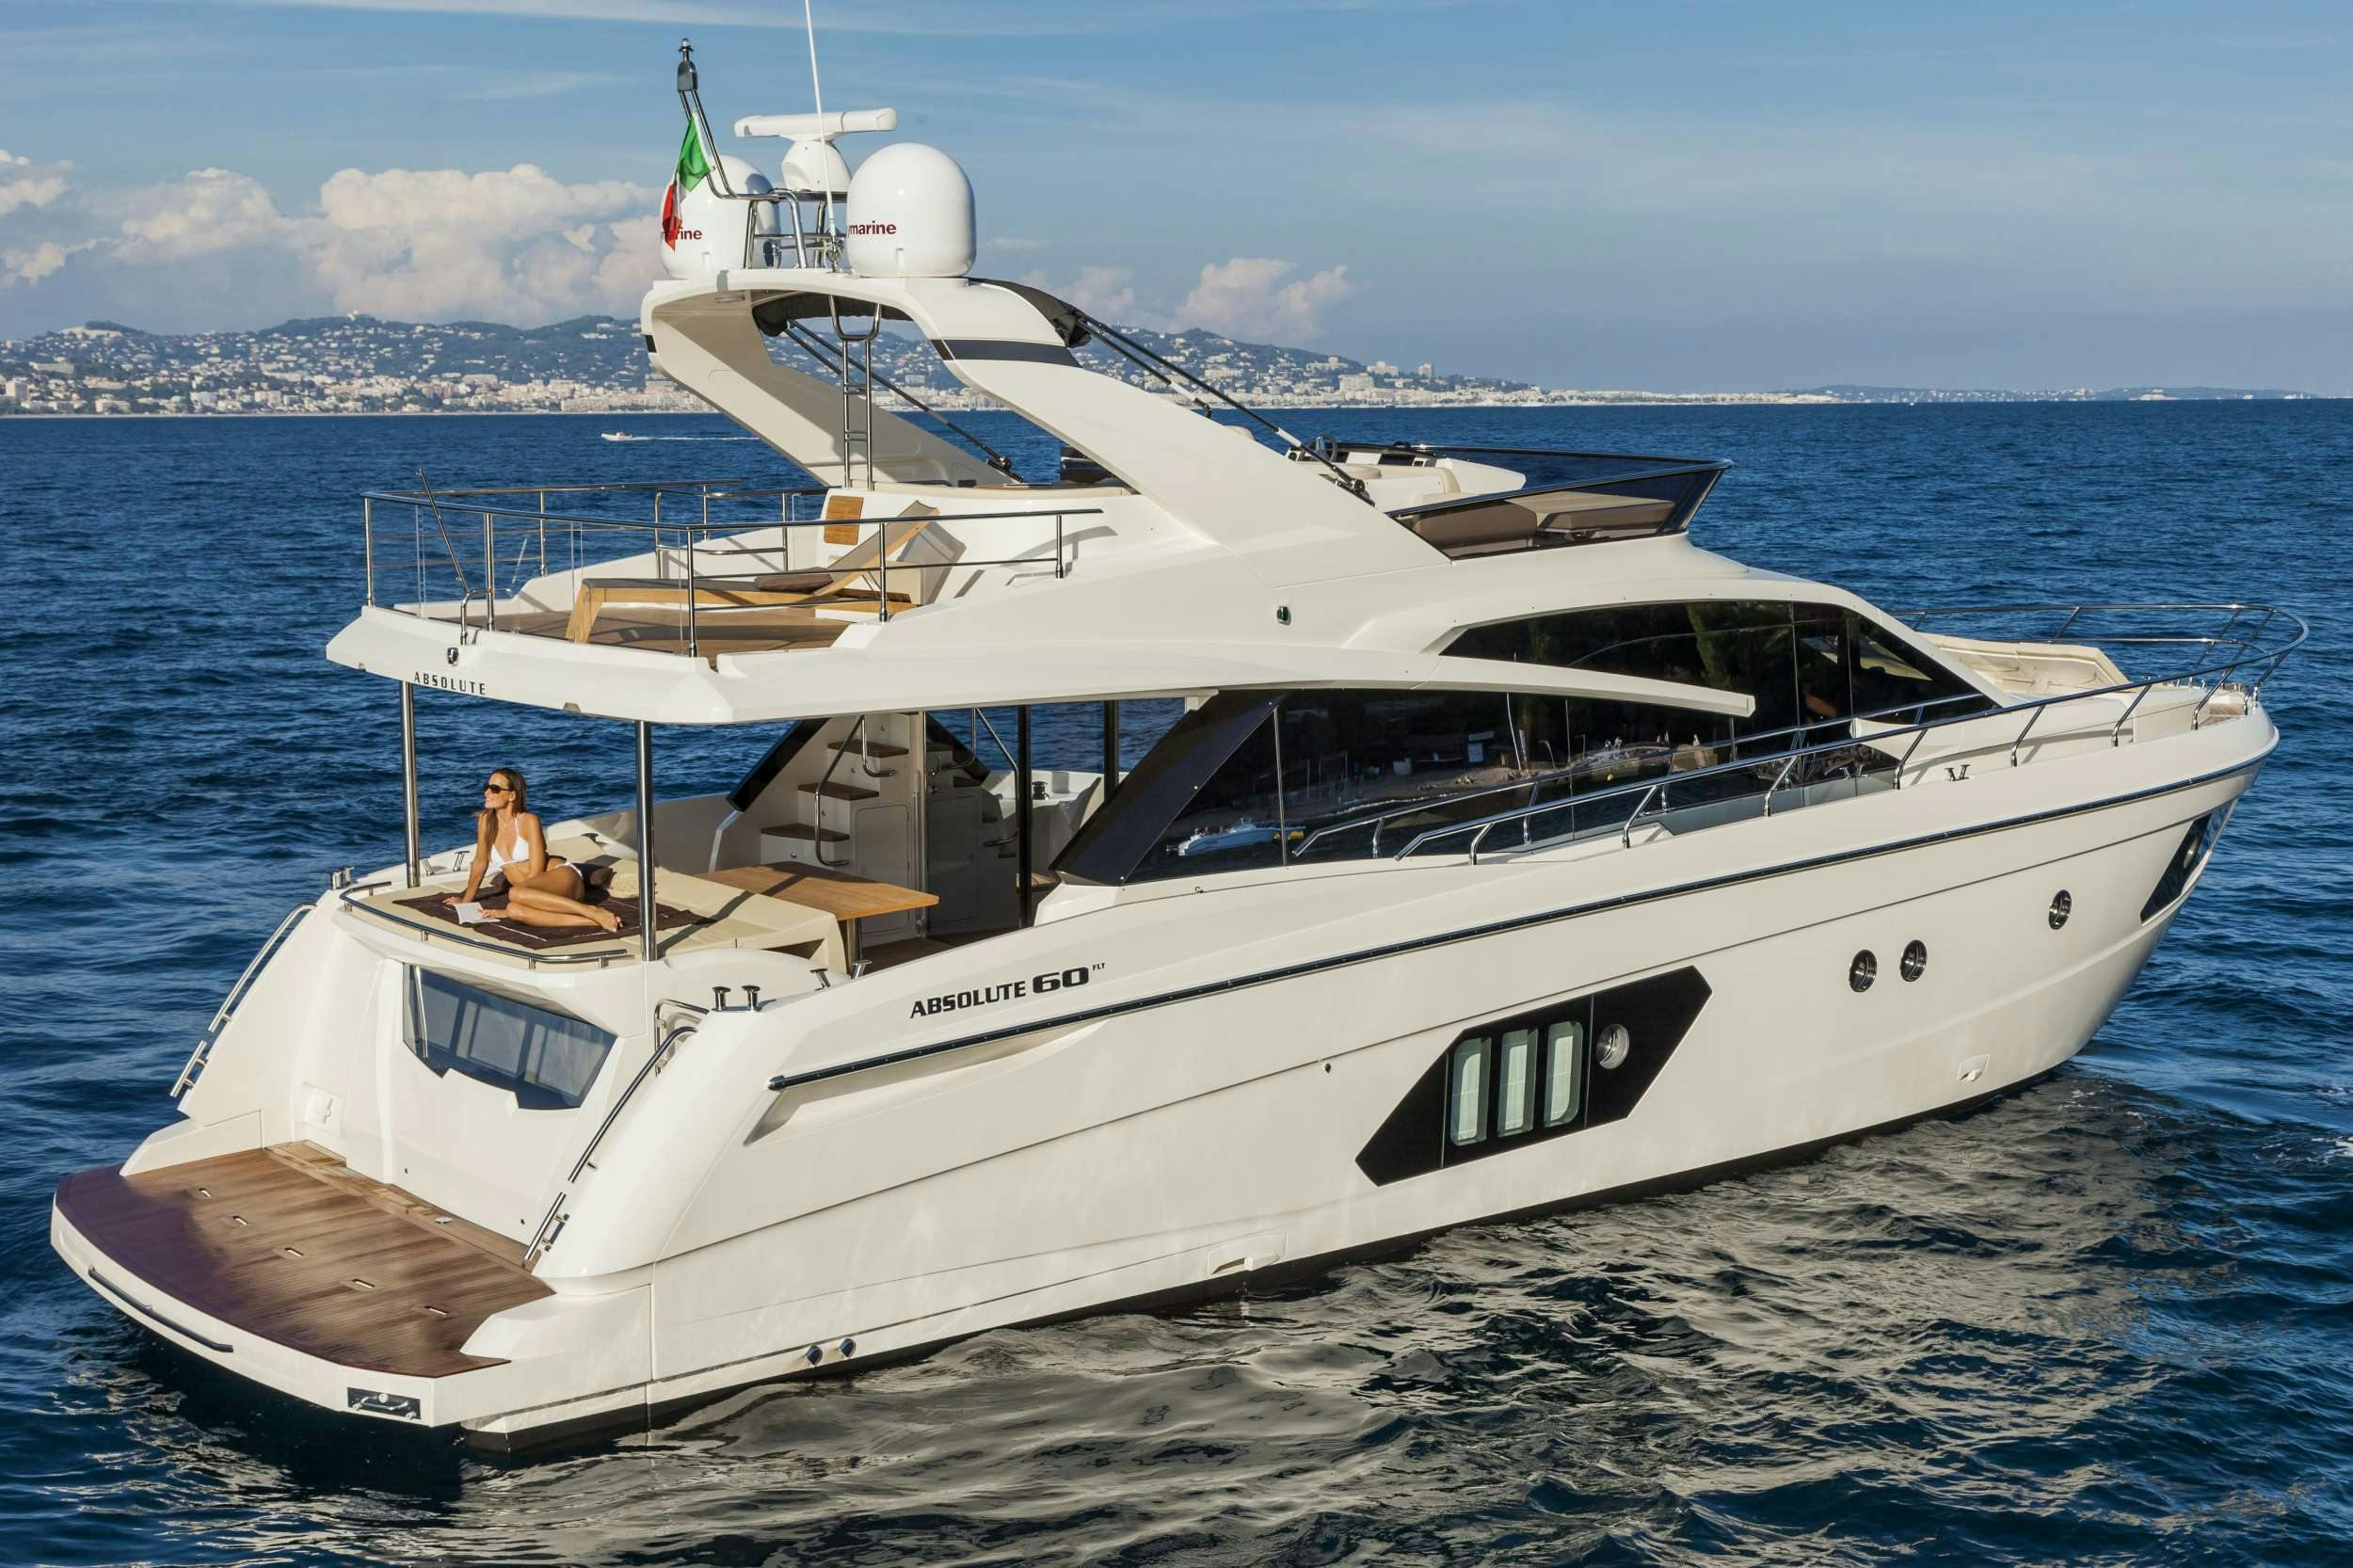 ABSOLUTE - Yacht Charter Marseille & Boat hire in Fr. Riviera, Corsica & Sardinia 1